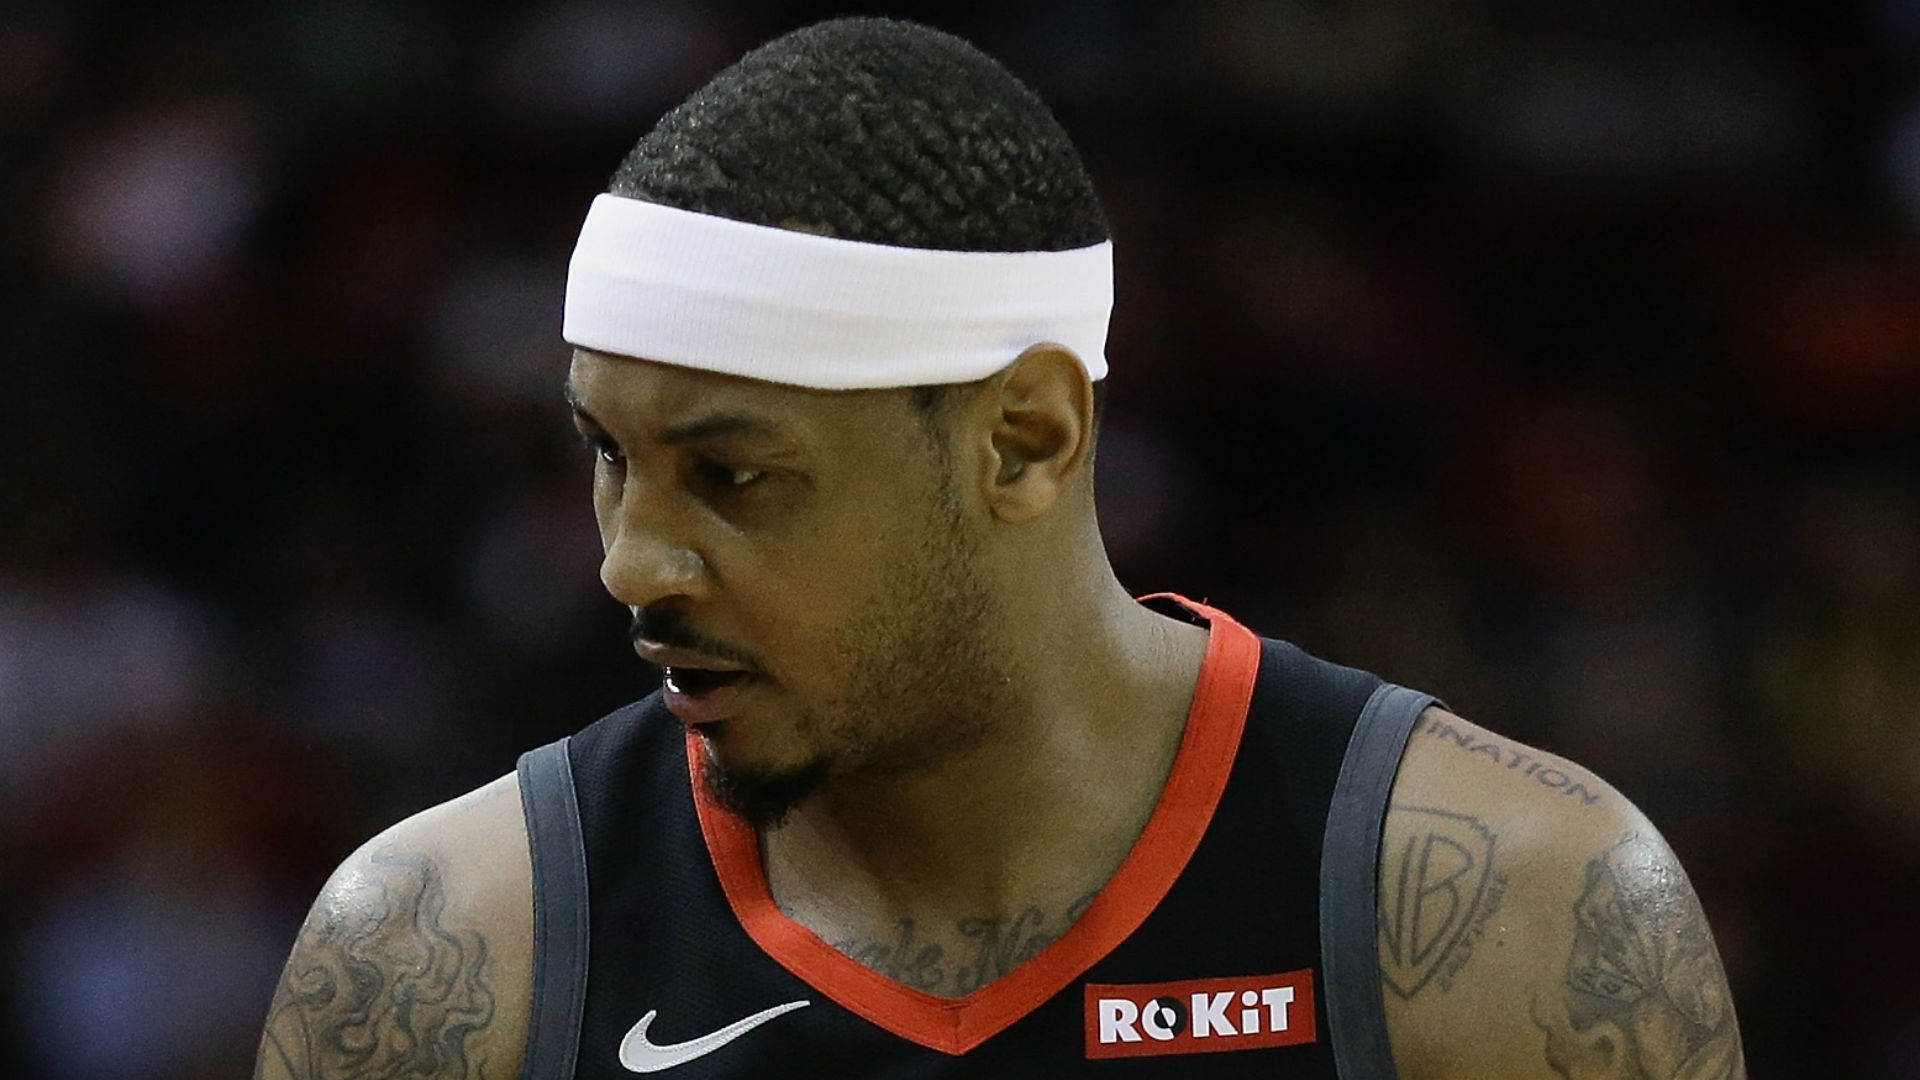 The Portland Trail Blazers suffered another loss, but debutant Carmelo Anthony was able to take the positives.